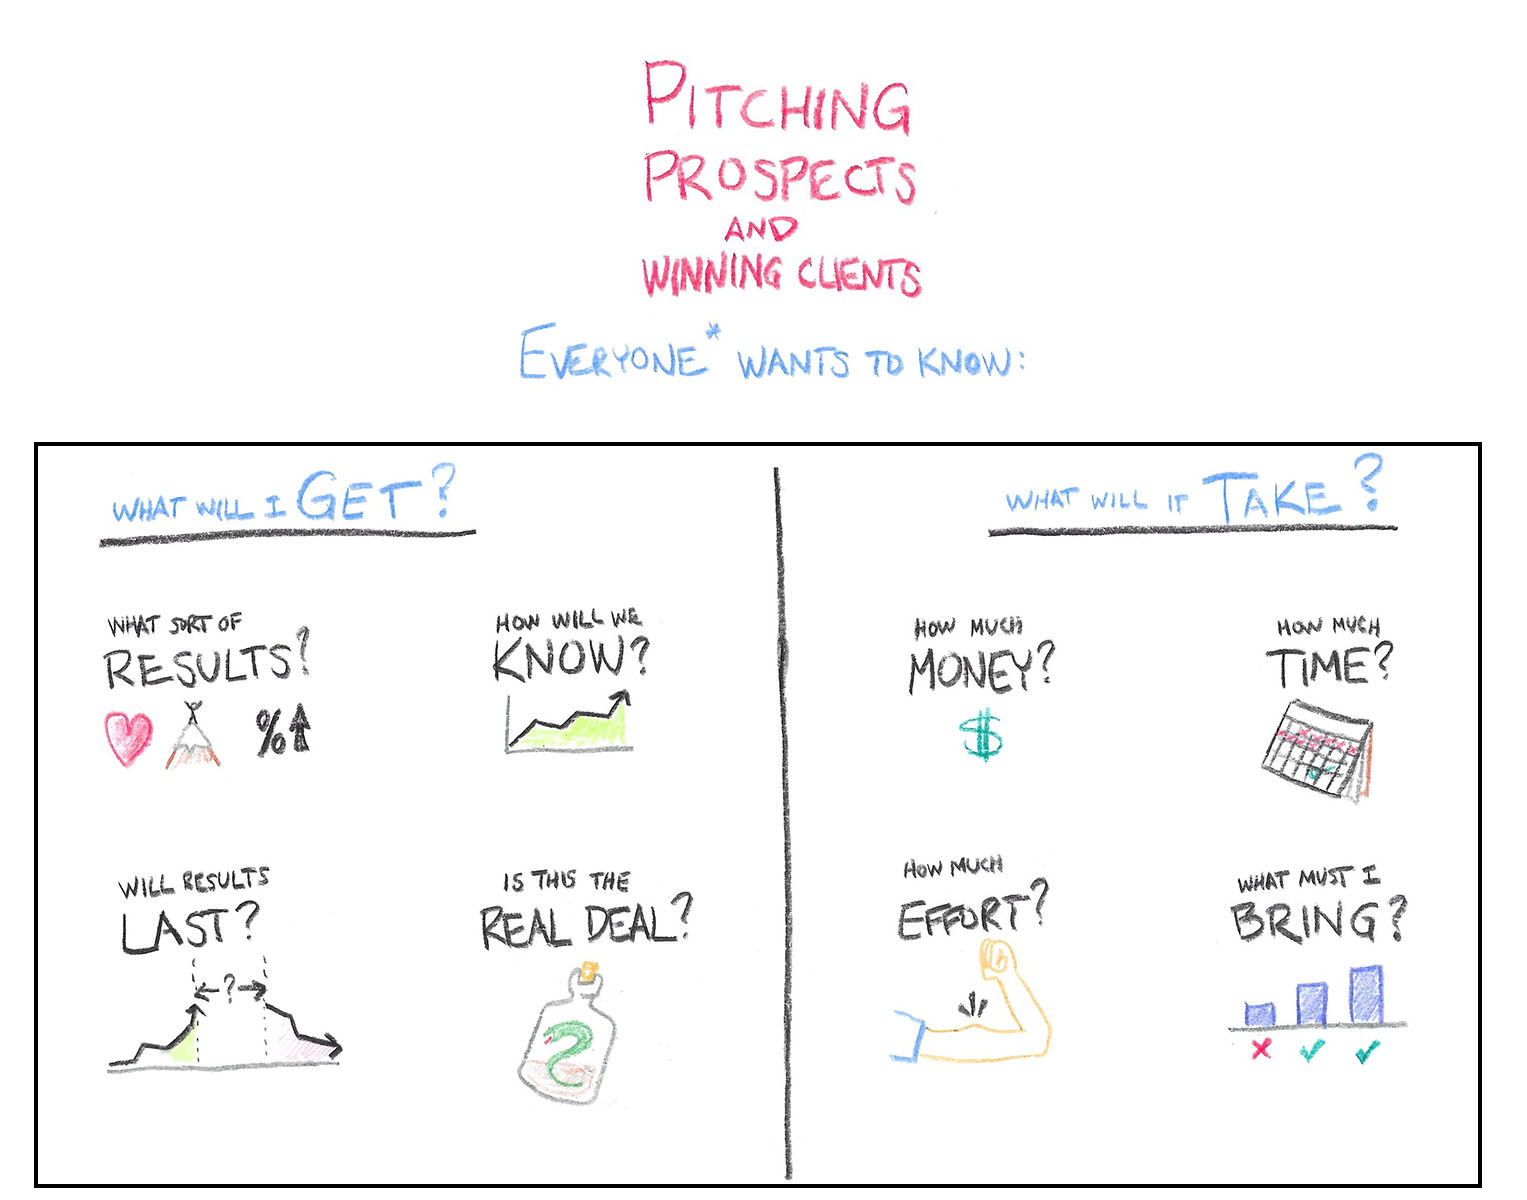 Hand-drawn diagram of Pitching Prospects and Winning Clients